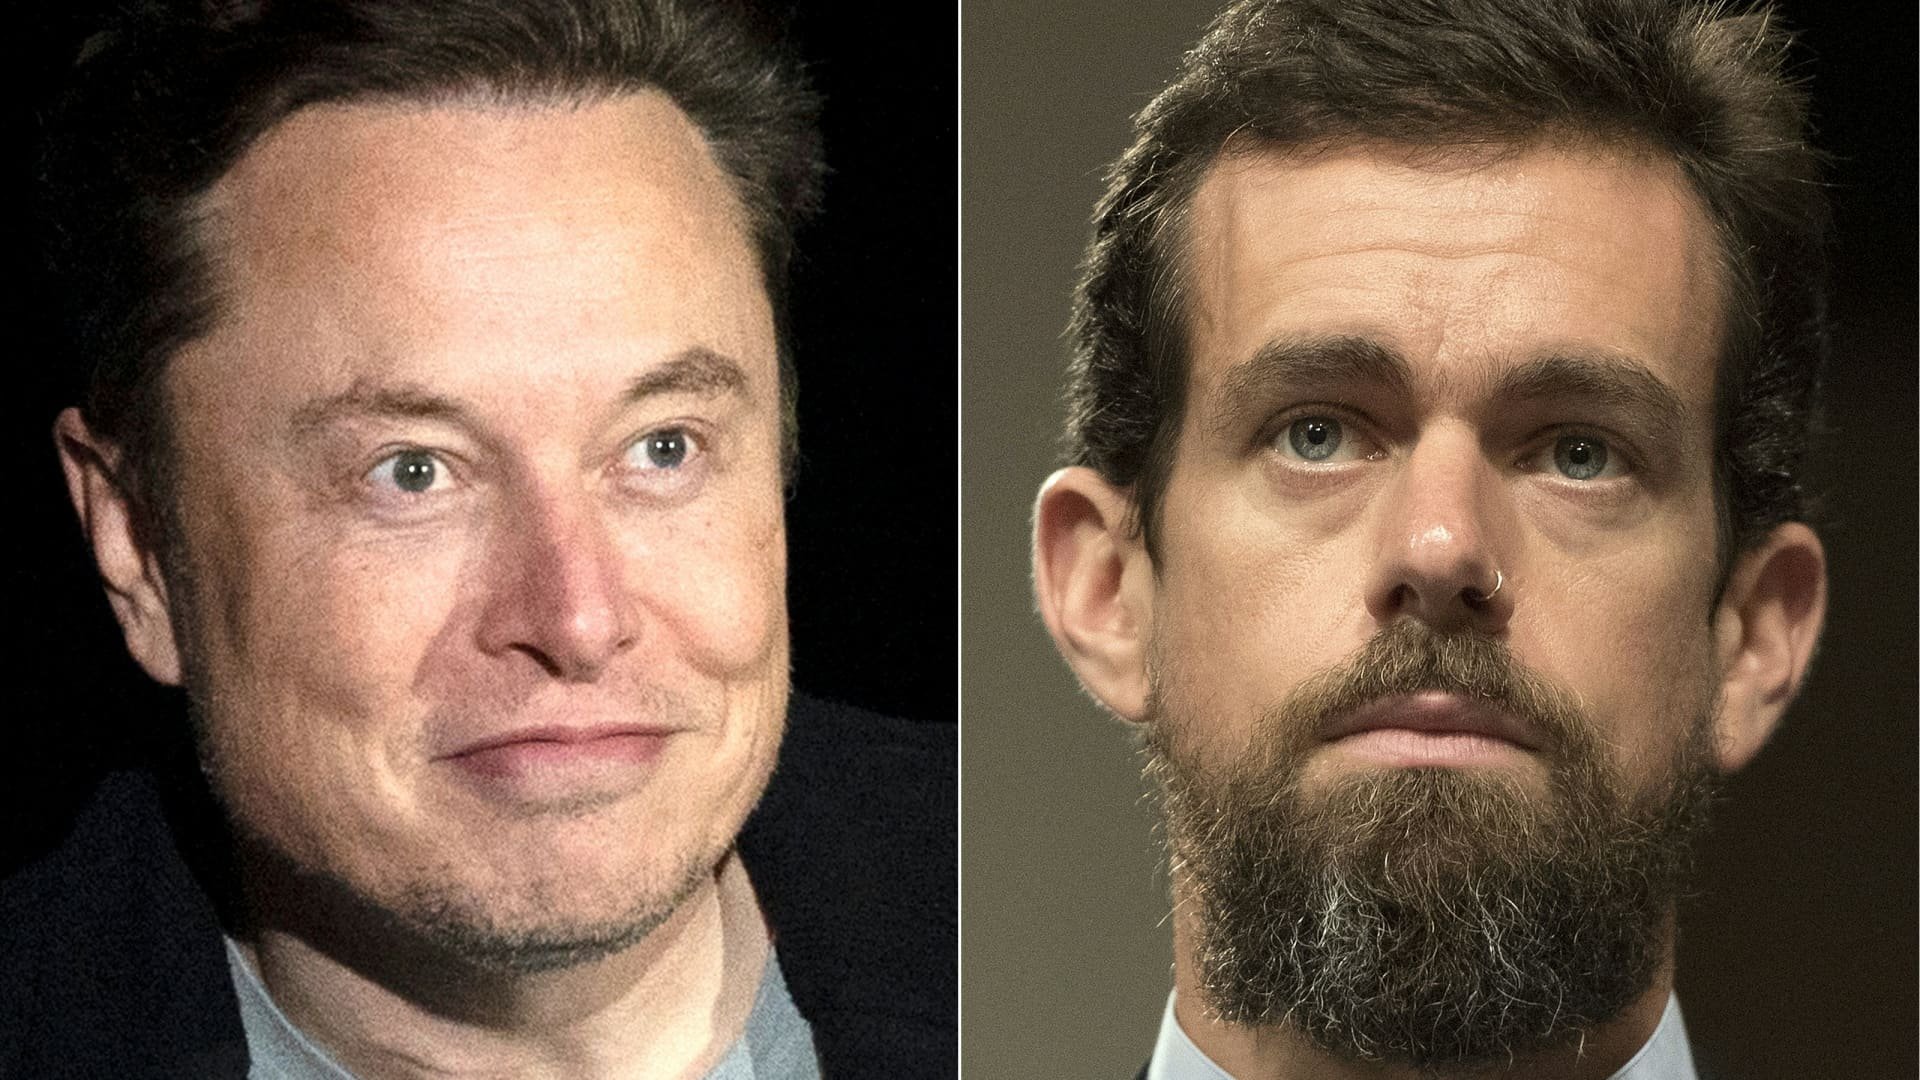 Jack Dorsey tried to get Elon Musk on Twitter's board but directors were too 'risk averse,' texts reveal